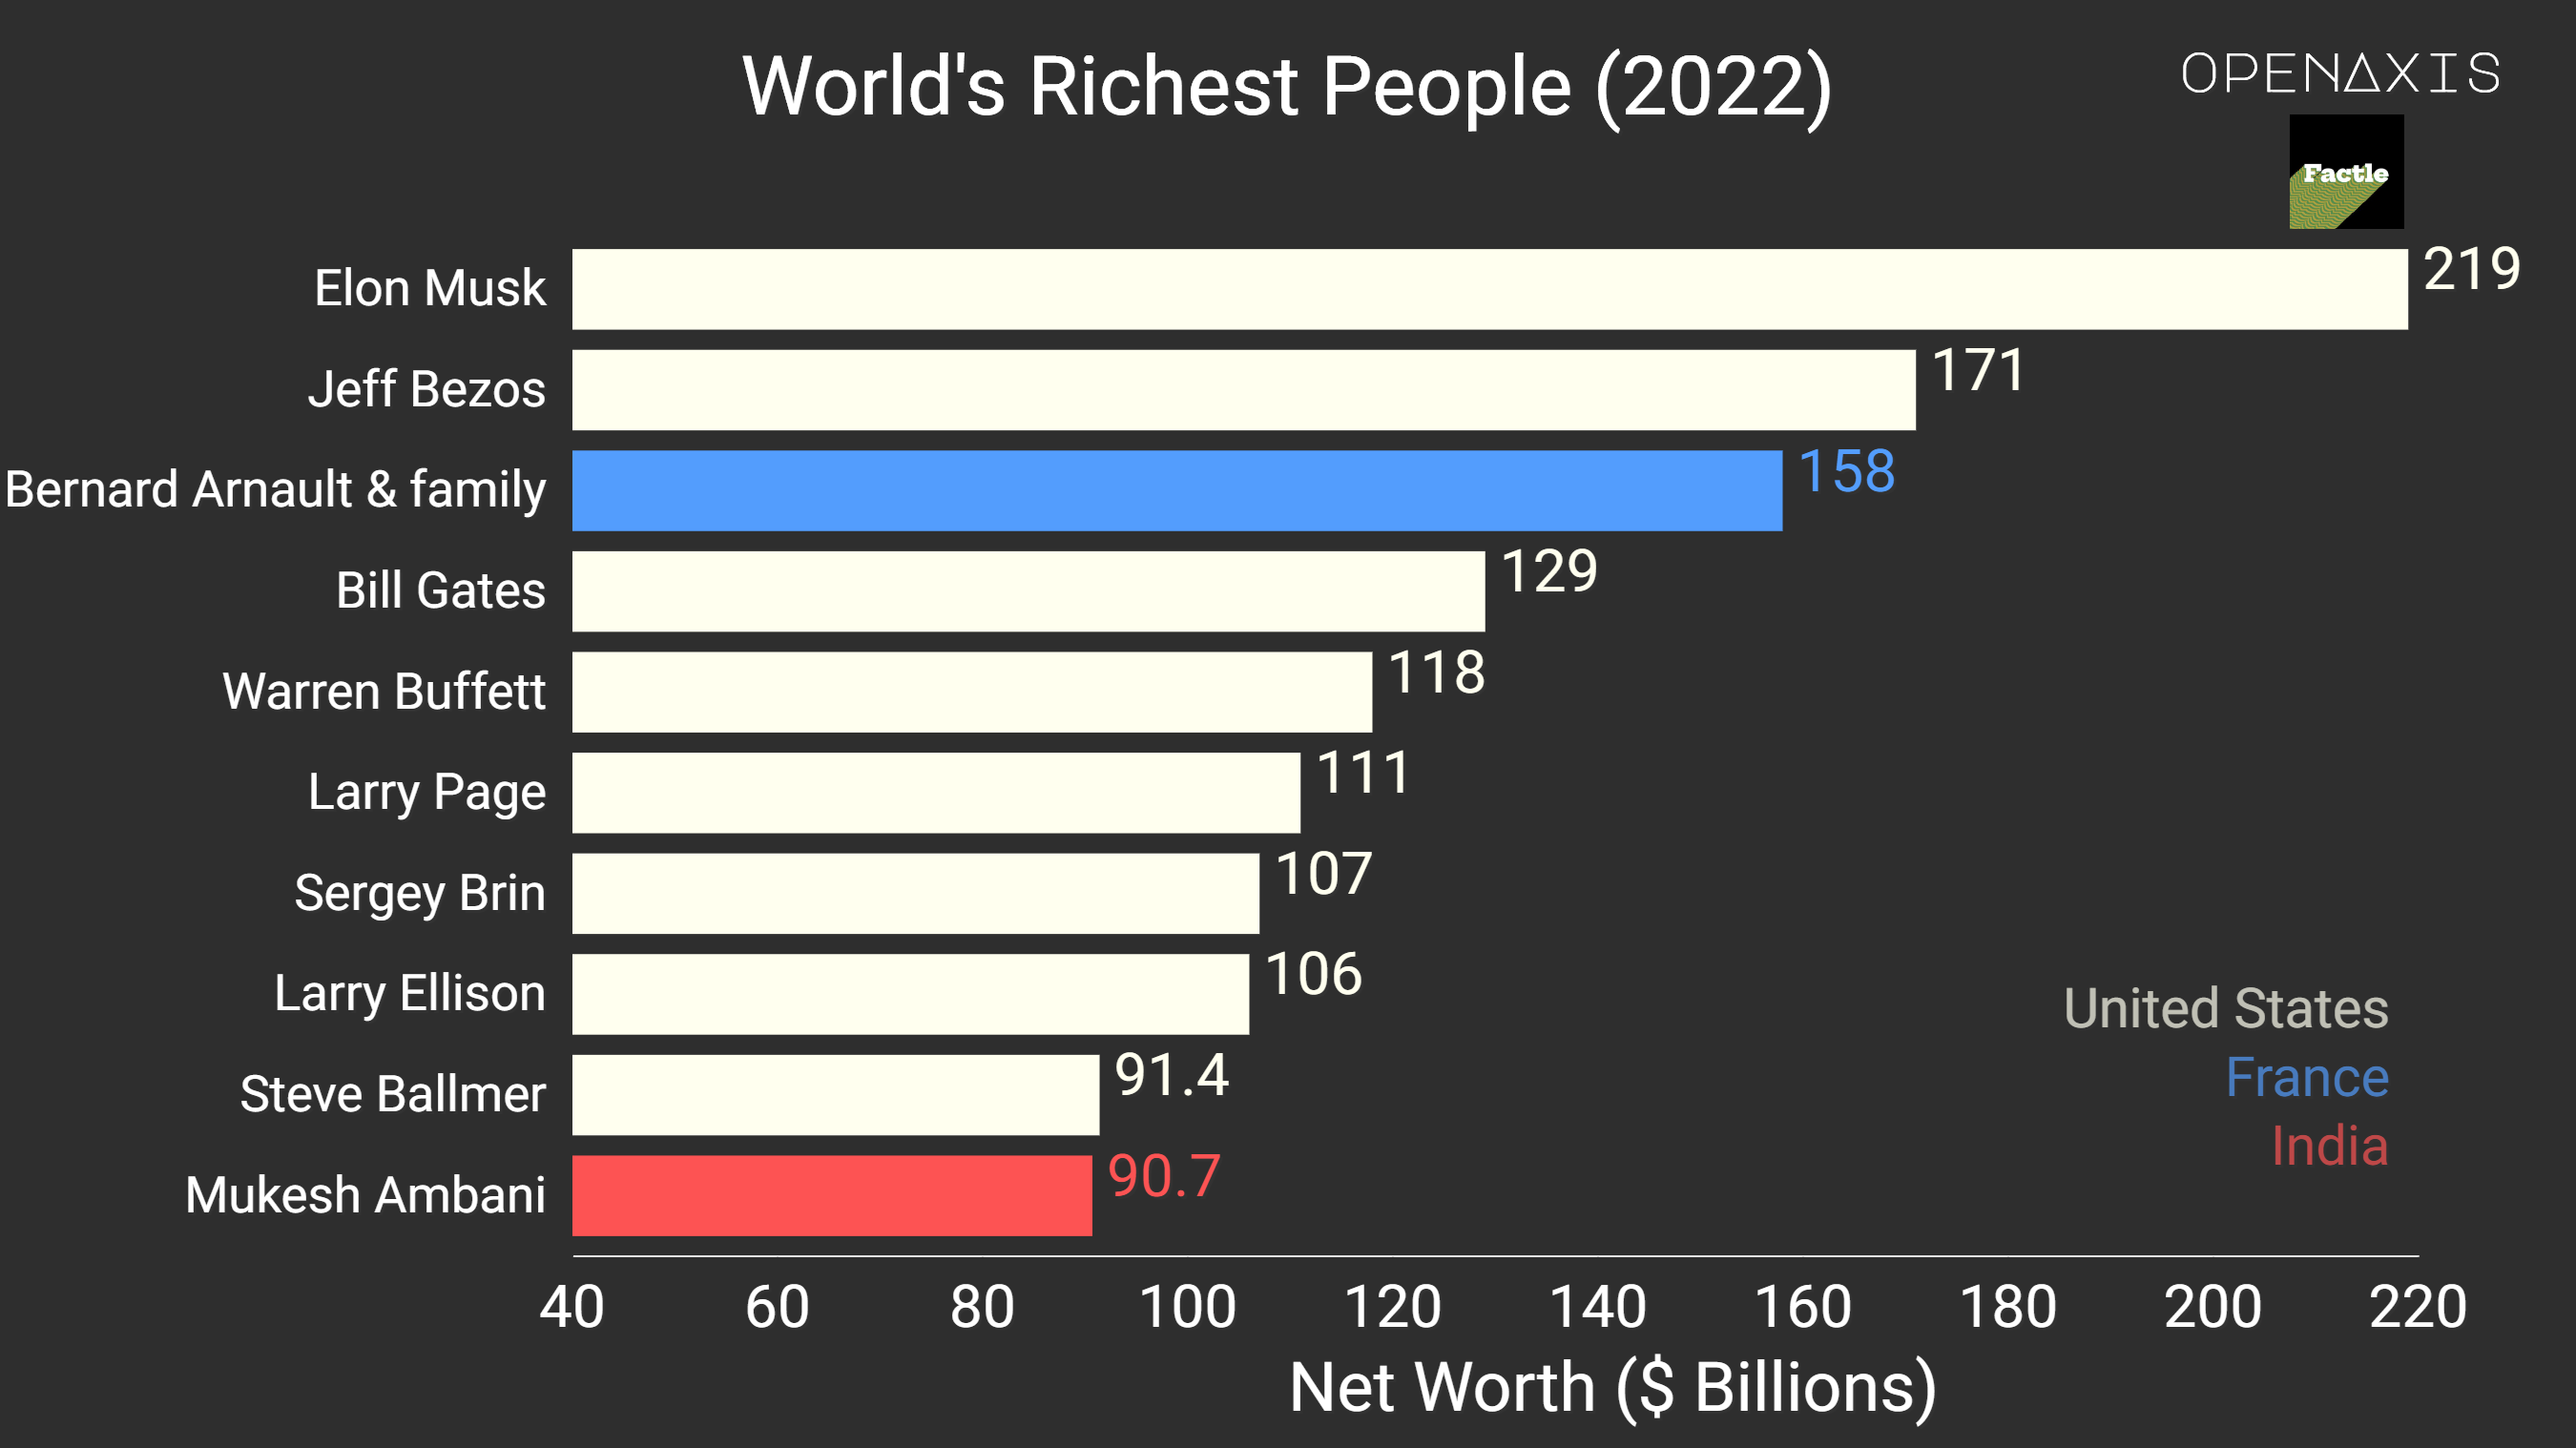 <p>Forbes’ 36th-annual ranking of the planet’s richest includes 2,668 people in 2022. They’re worth a collective $12.7 trillion—$400 billion less than in 2021. Eight of the top ten are from the United States. Check out the entire list and dataset below including billionaires by net worth, country, and industry. </p><p><span data-index="0" data-denotation-char data-id="0" data-value="&lt;a href=&quot;/search?q=%23wealth&quot; target=_self&gt;#wealth" data-link="/search?q=%23wealth">﻿<span contenteditable="false"><span></span><a href="/search?q=%23wealth" target="_self">#wealth</a></span>﻿</span> <span data-index="0" data-denotation-char data-id="0" data-value="&lt;a href=&quot;/search?q=%23billionaires&quot; target=_self&gt;#billionaires" data-link="/search?q=%23billionaires">﻿<span contenteditable="false"><span></span><a href="/search?q=%23billionaires" target="_self">#billionaires</a></span>﻿</span> </p><p>Source: <a href="/data/3661" target="_blank">Forbes</a></p>